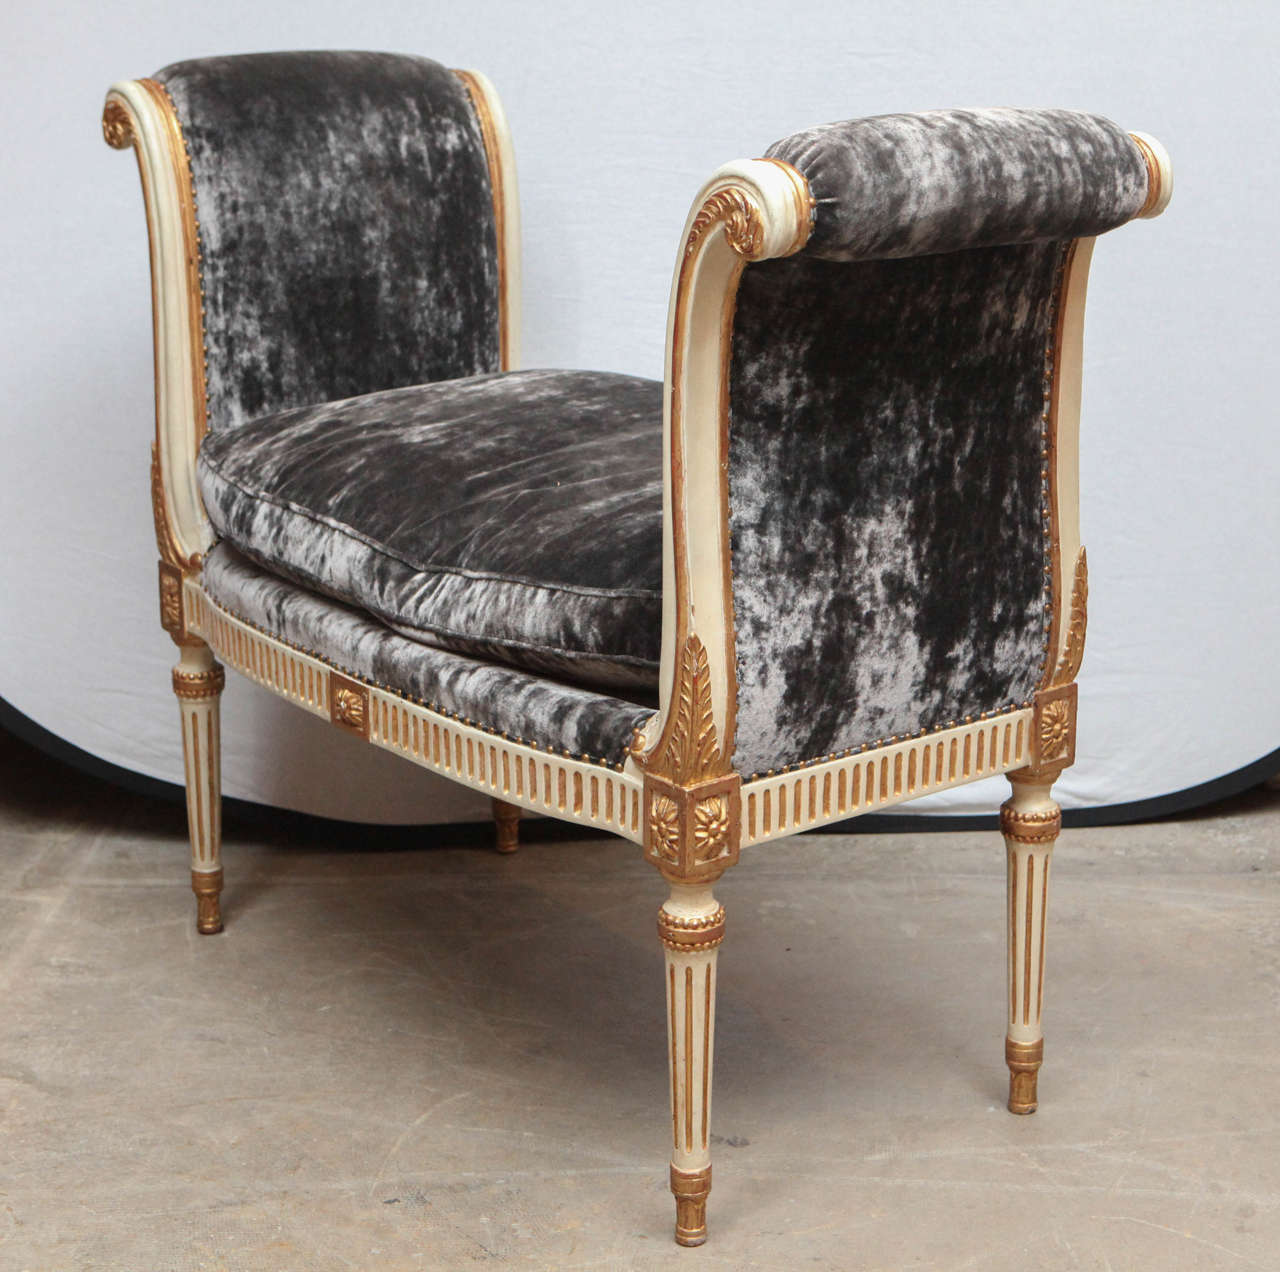 Giltwood and Painted French Style Curled Arm Bench with Gray Velvet Upholstery. They are 22k gilt and painted. The price quoted below is for one bench but there are two benches available.   (not antique)